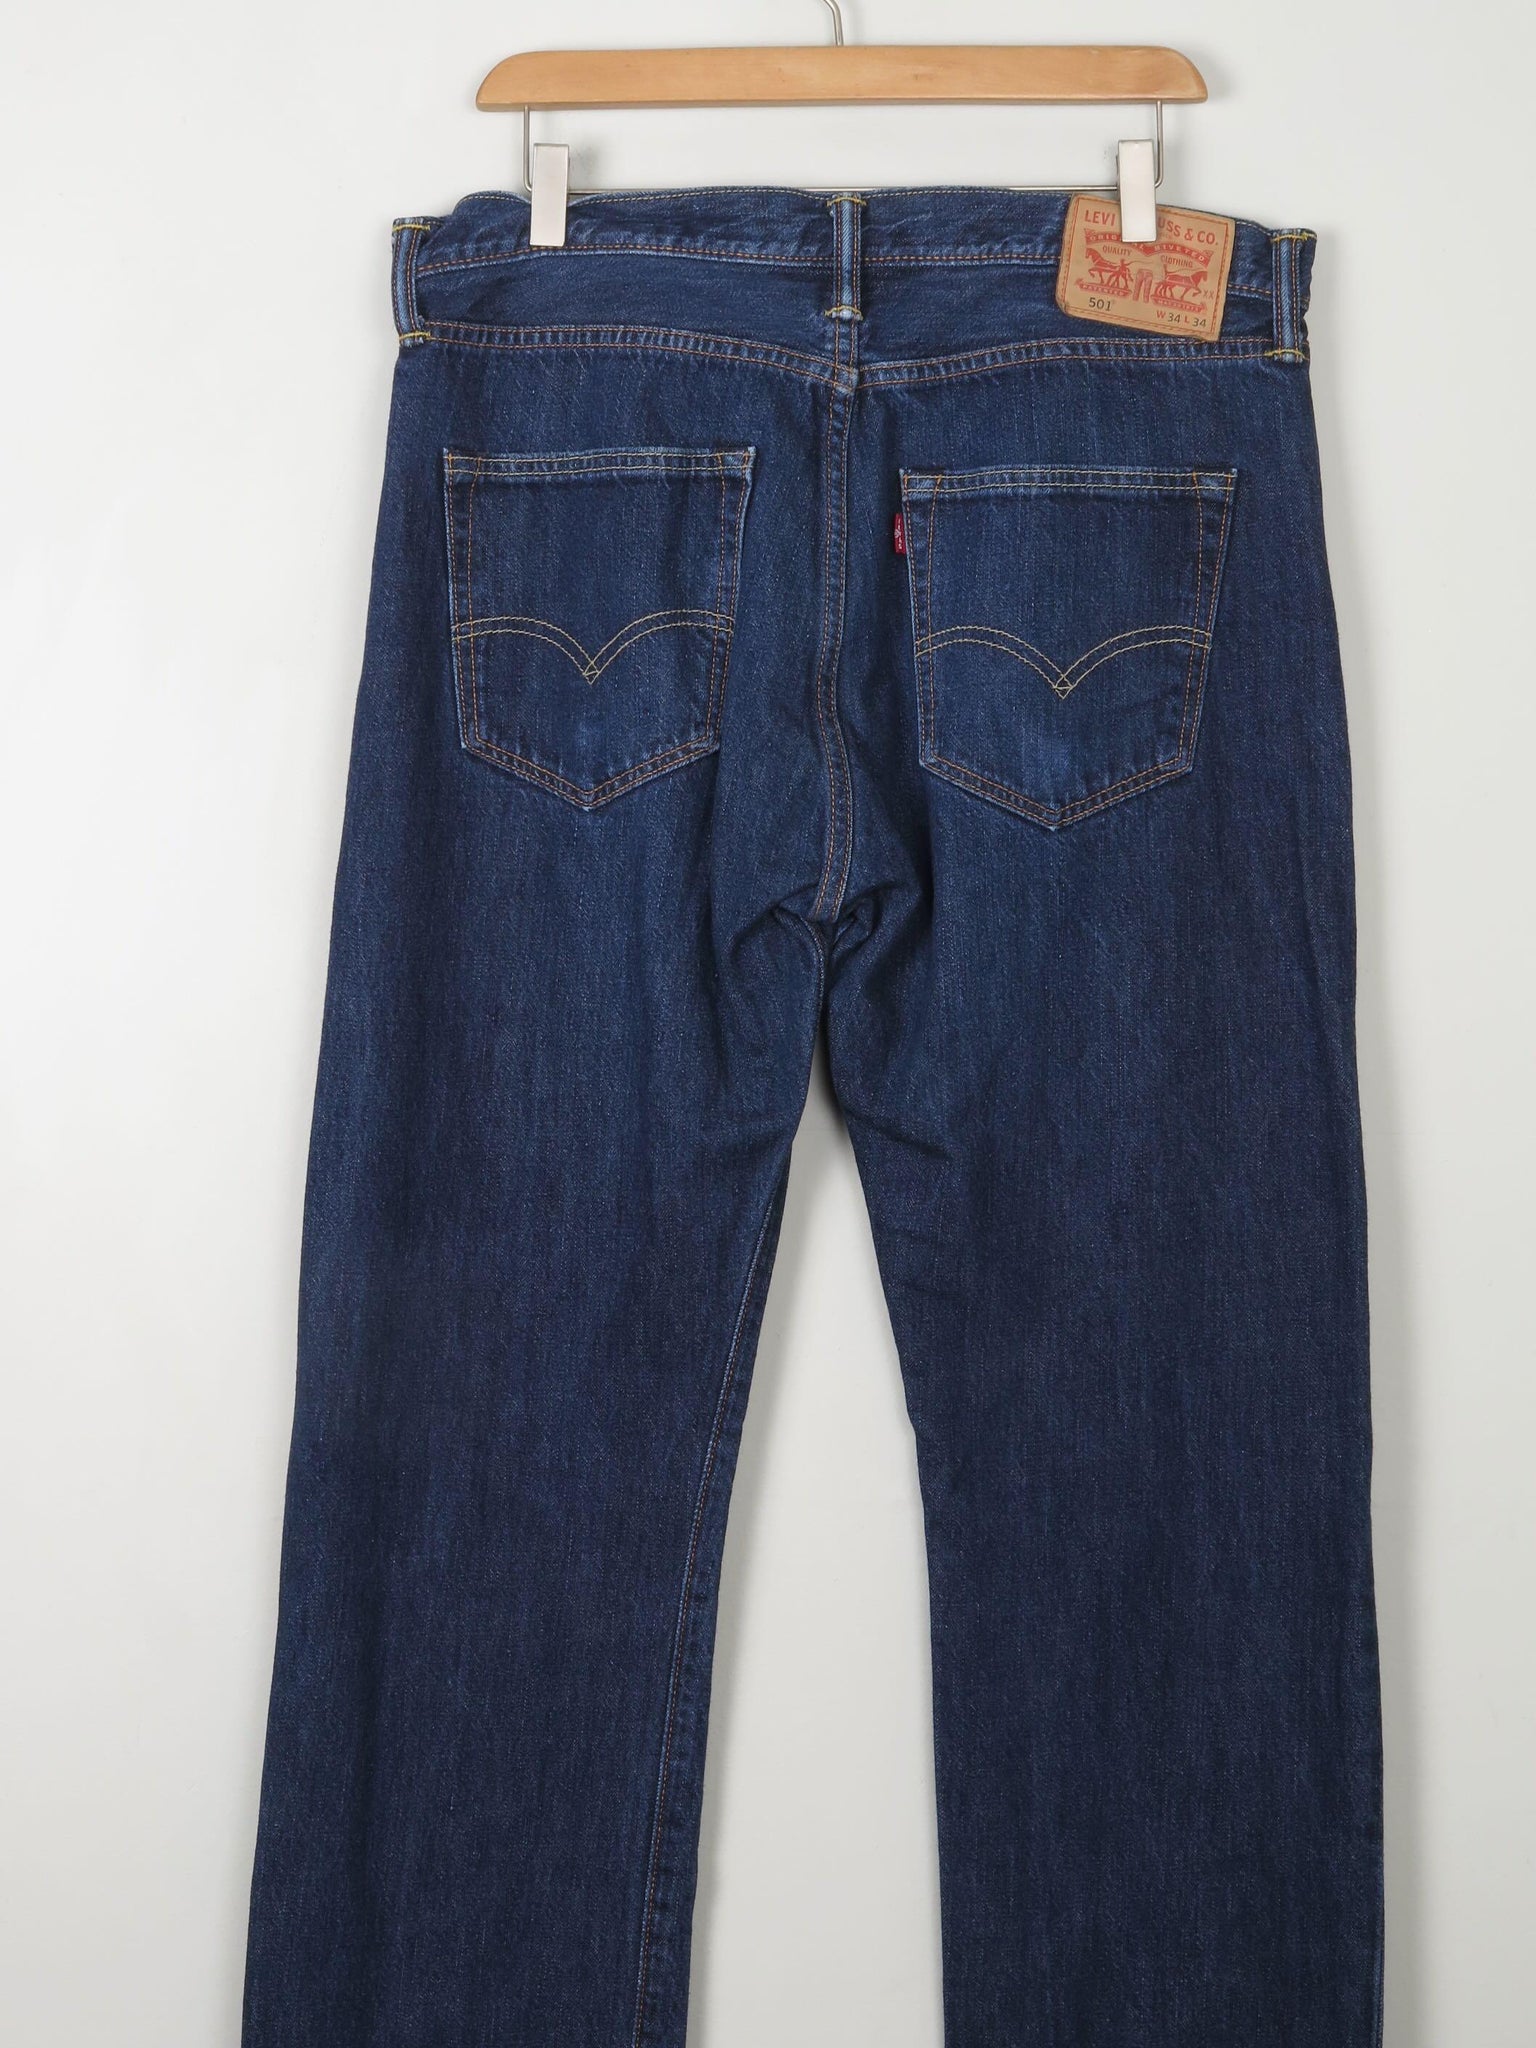 Blue Levi's 501s  Jeans 34/34 - The Harlequin